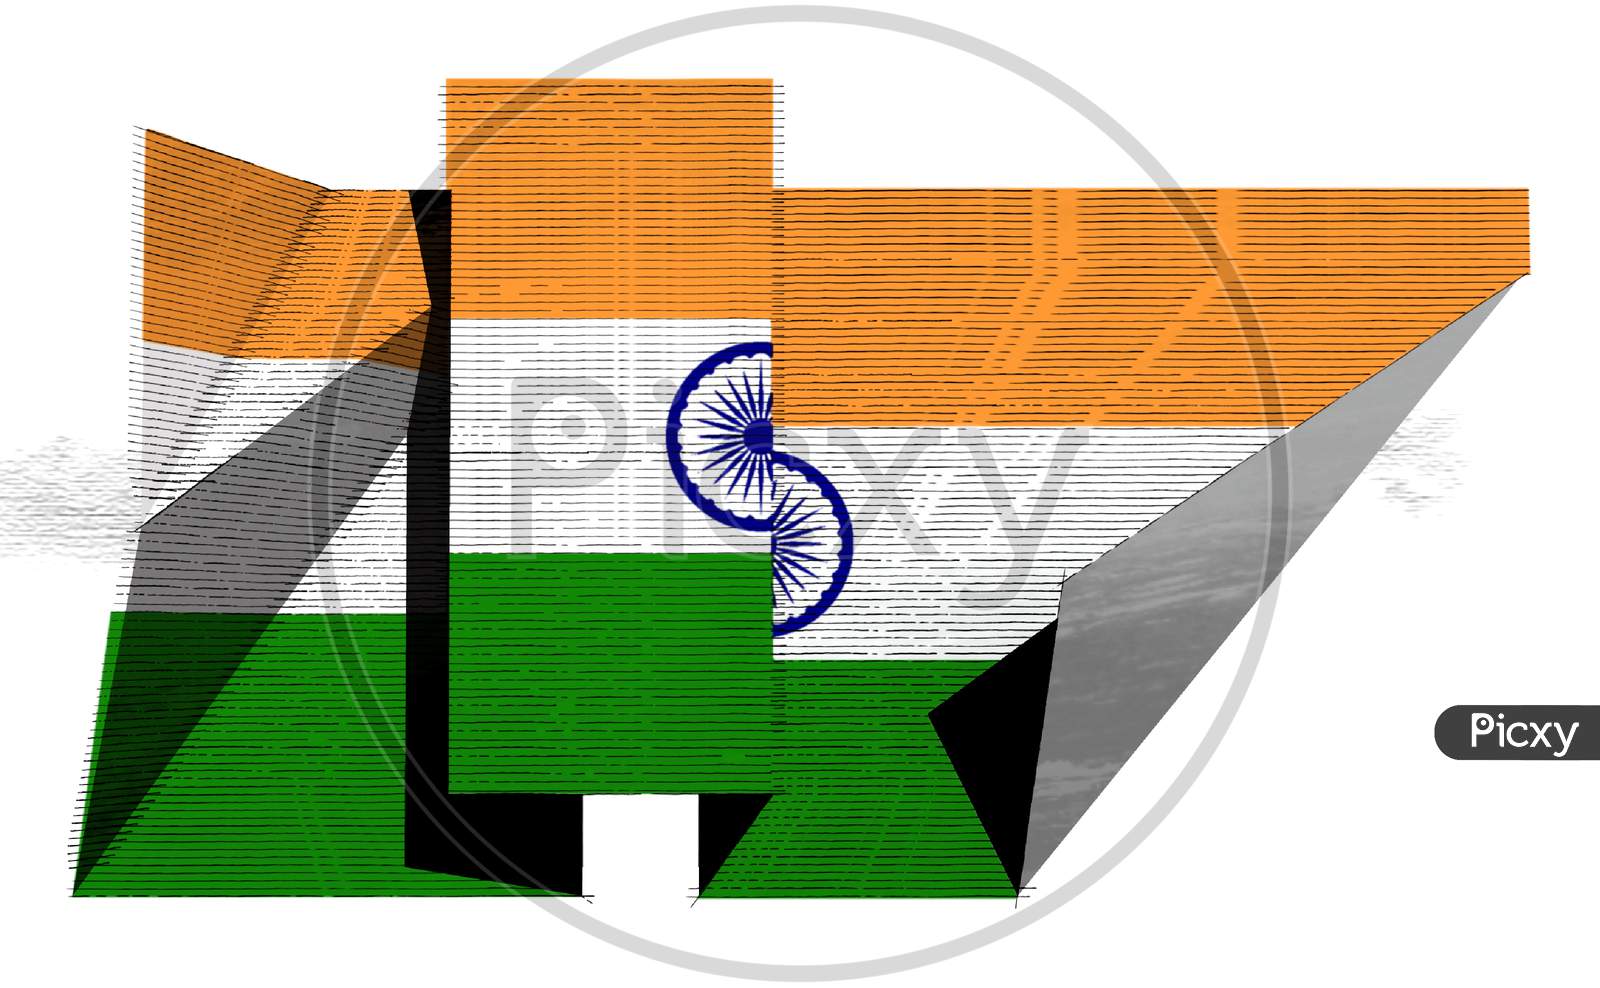 Hand Drawn Indian Flag In Flat Geometric Style On White Background